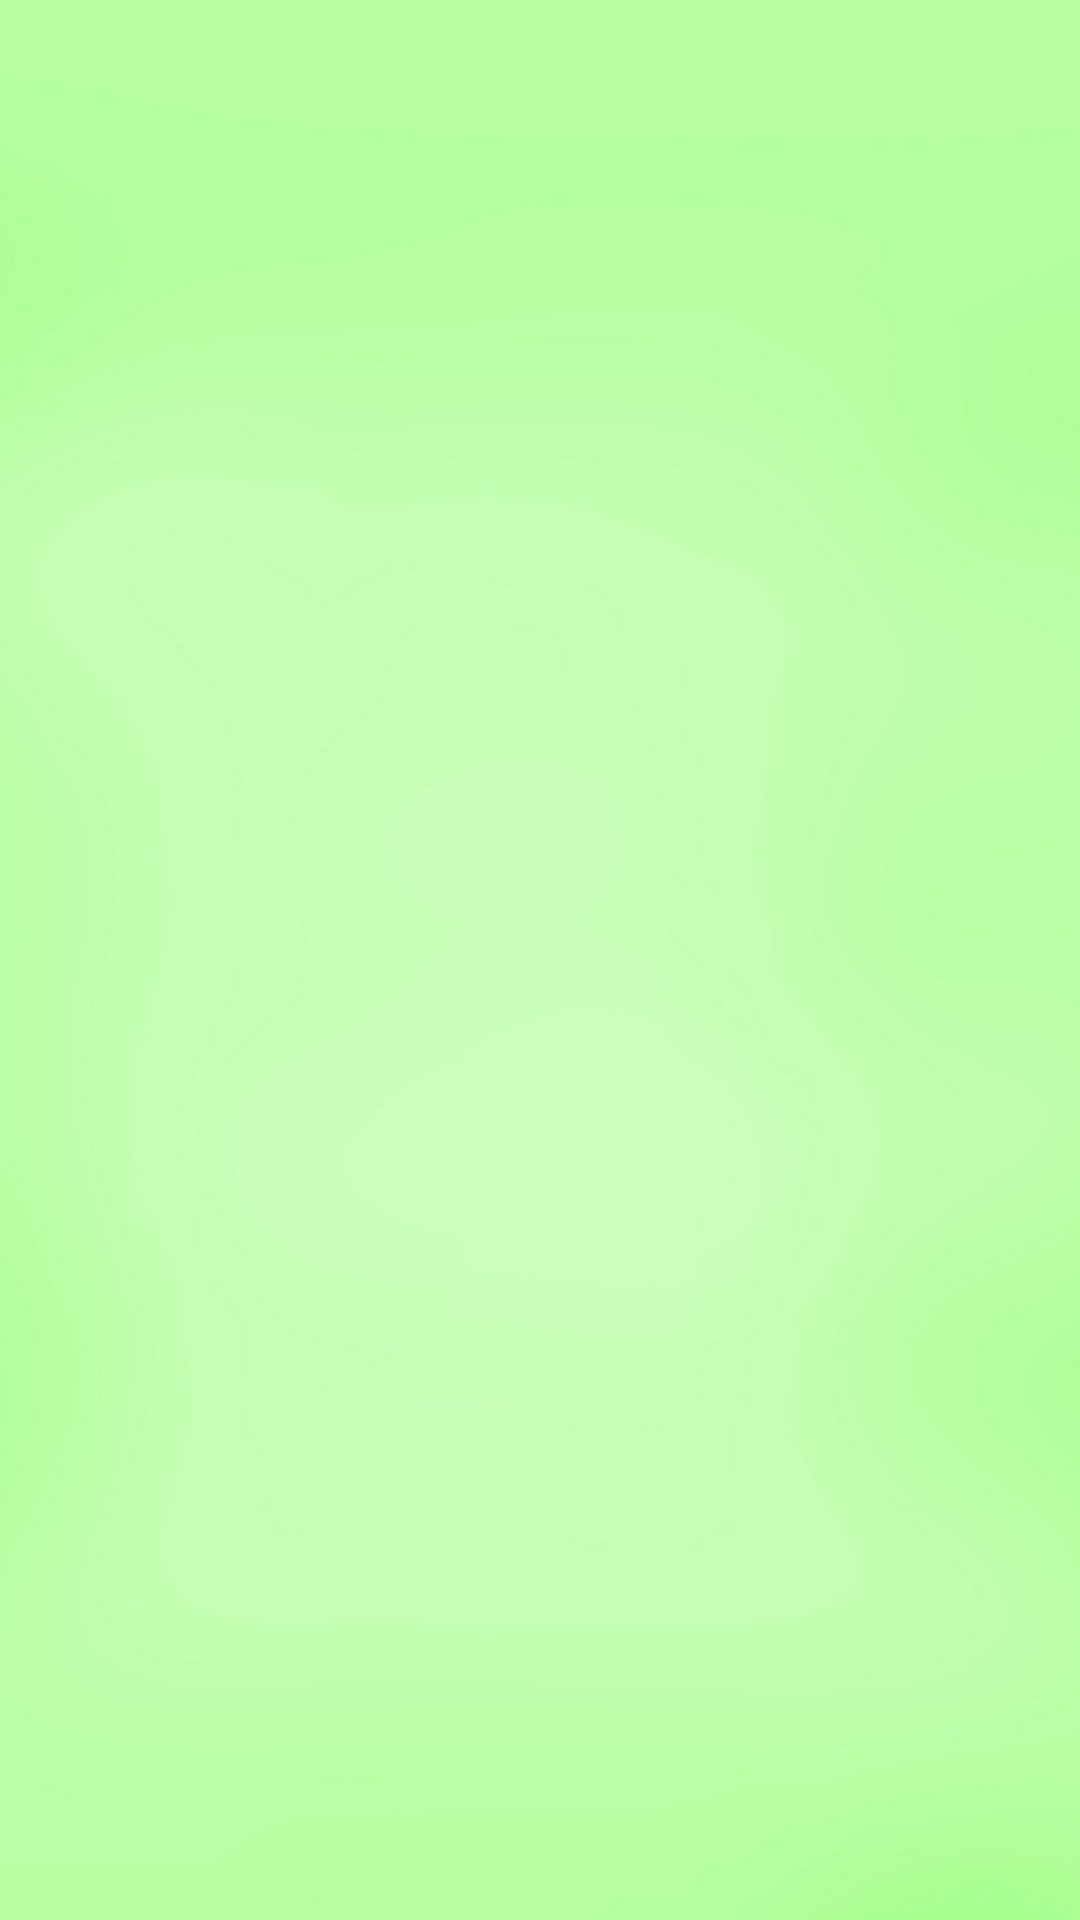 Wallpaper Light Green Android with image resolution 1080x1920 pixel. You can make this wallpaper for your Android backgrounds, Tablet, Smartphones Screensavers and Mobile Phone Lock Screen